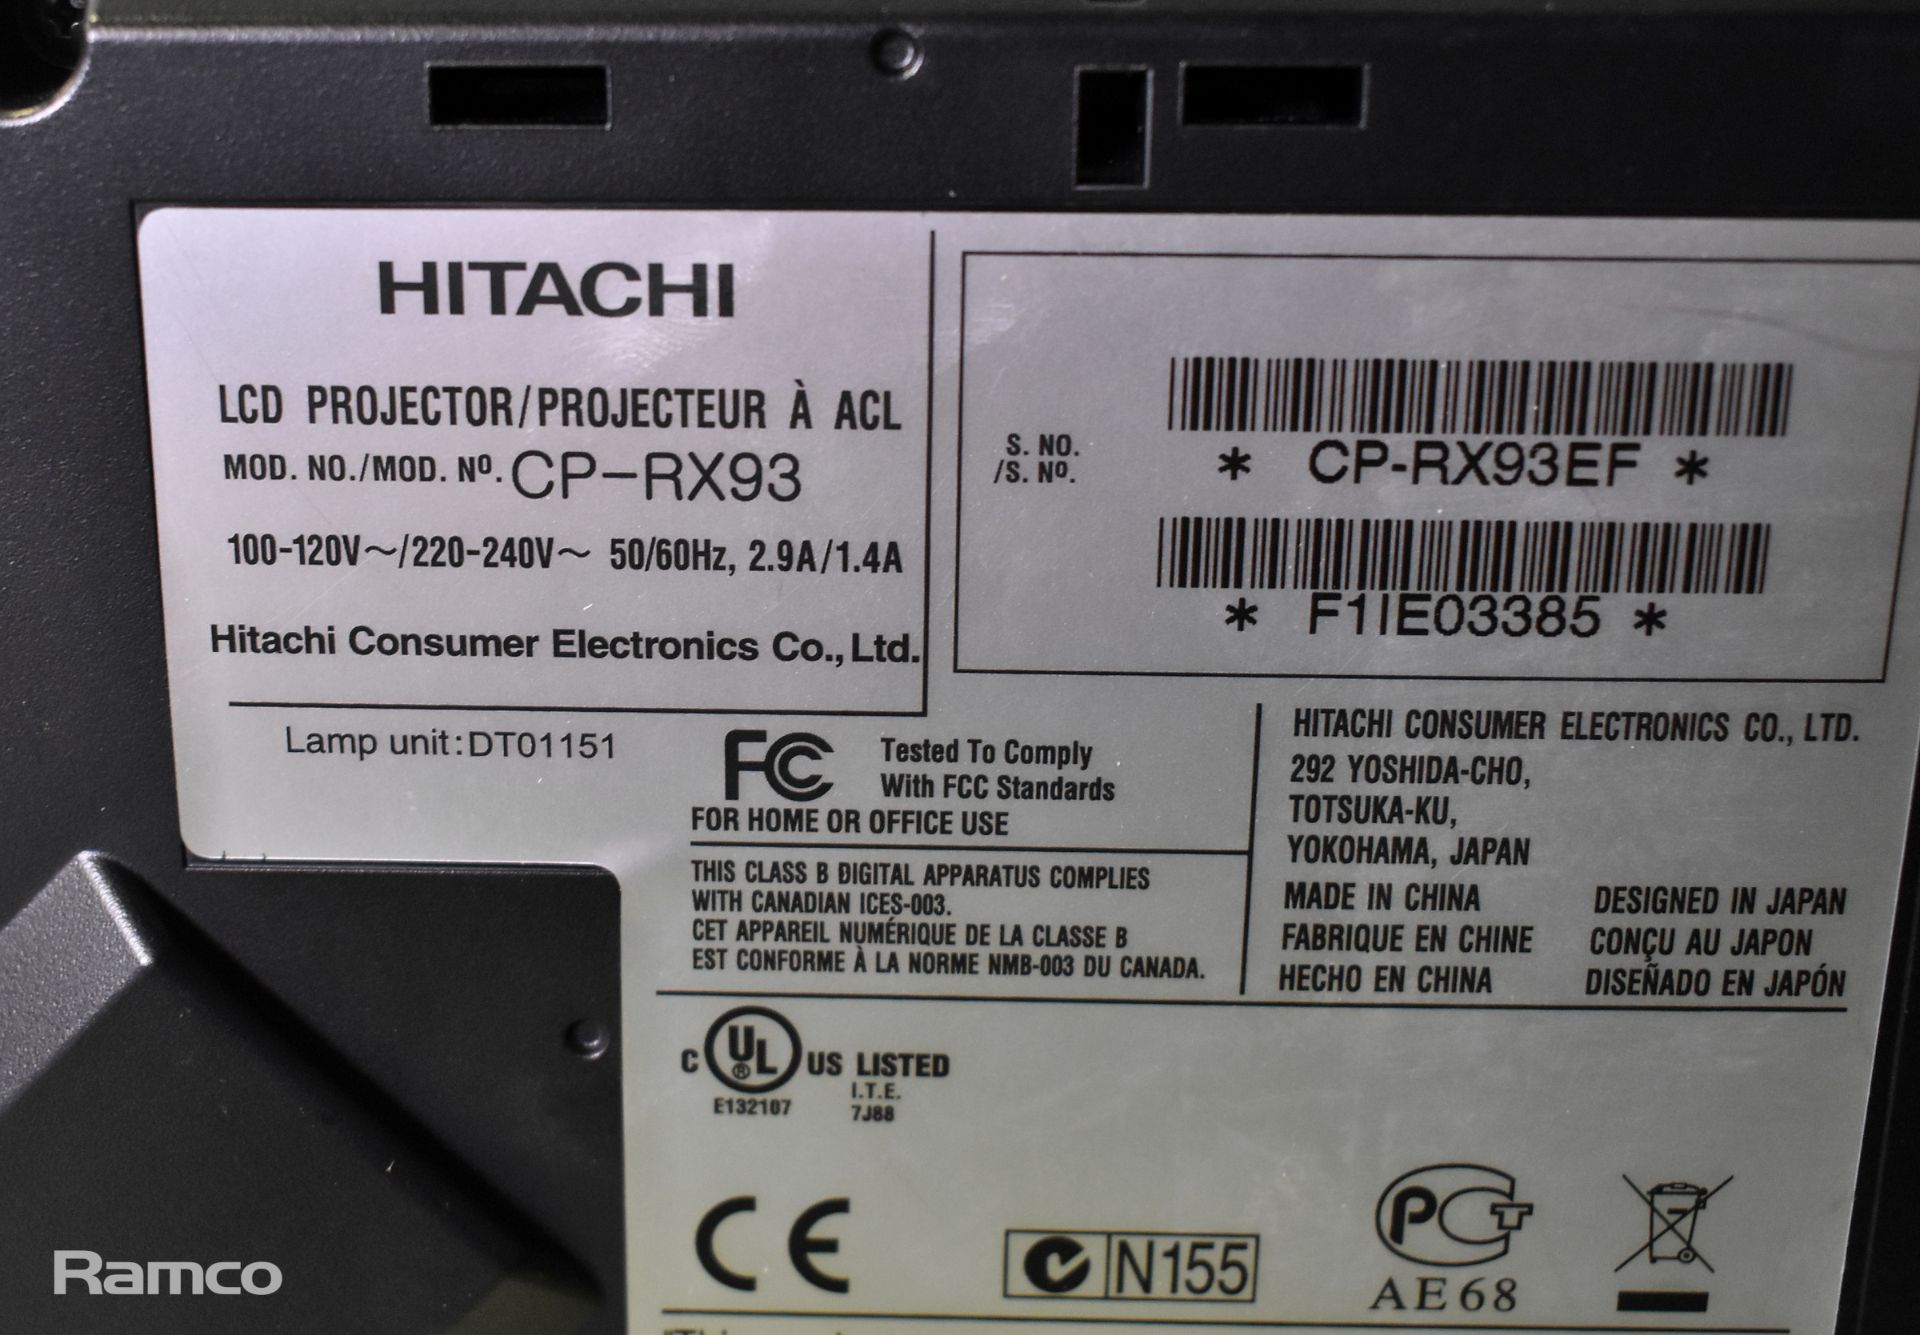 Hitachi CP-RX93 LCD projector unit with remote and document - Image 4 of 4